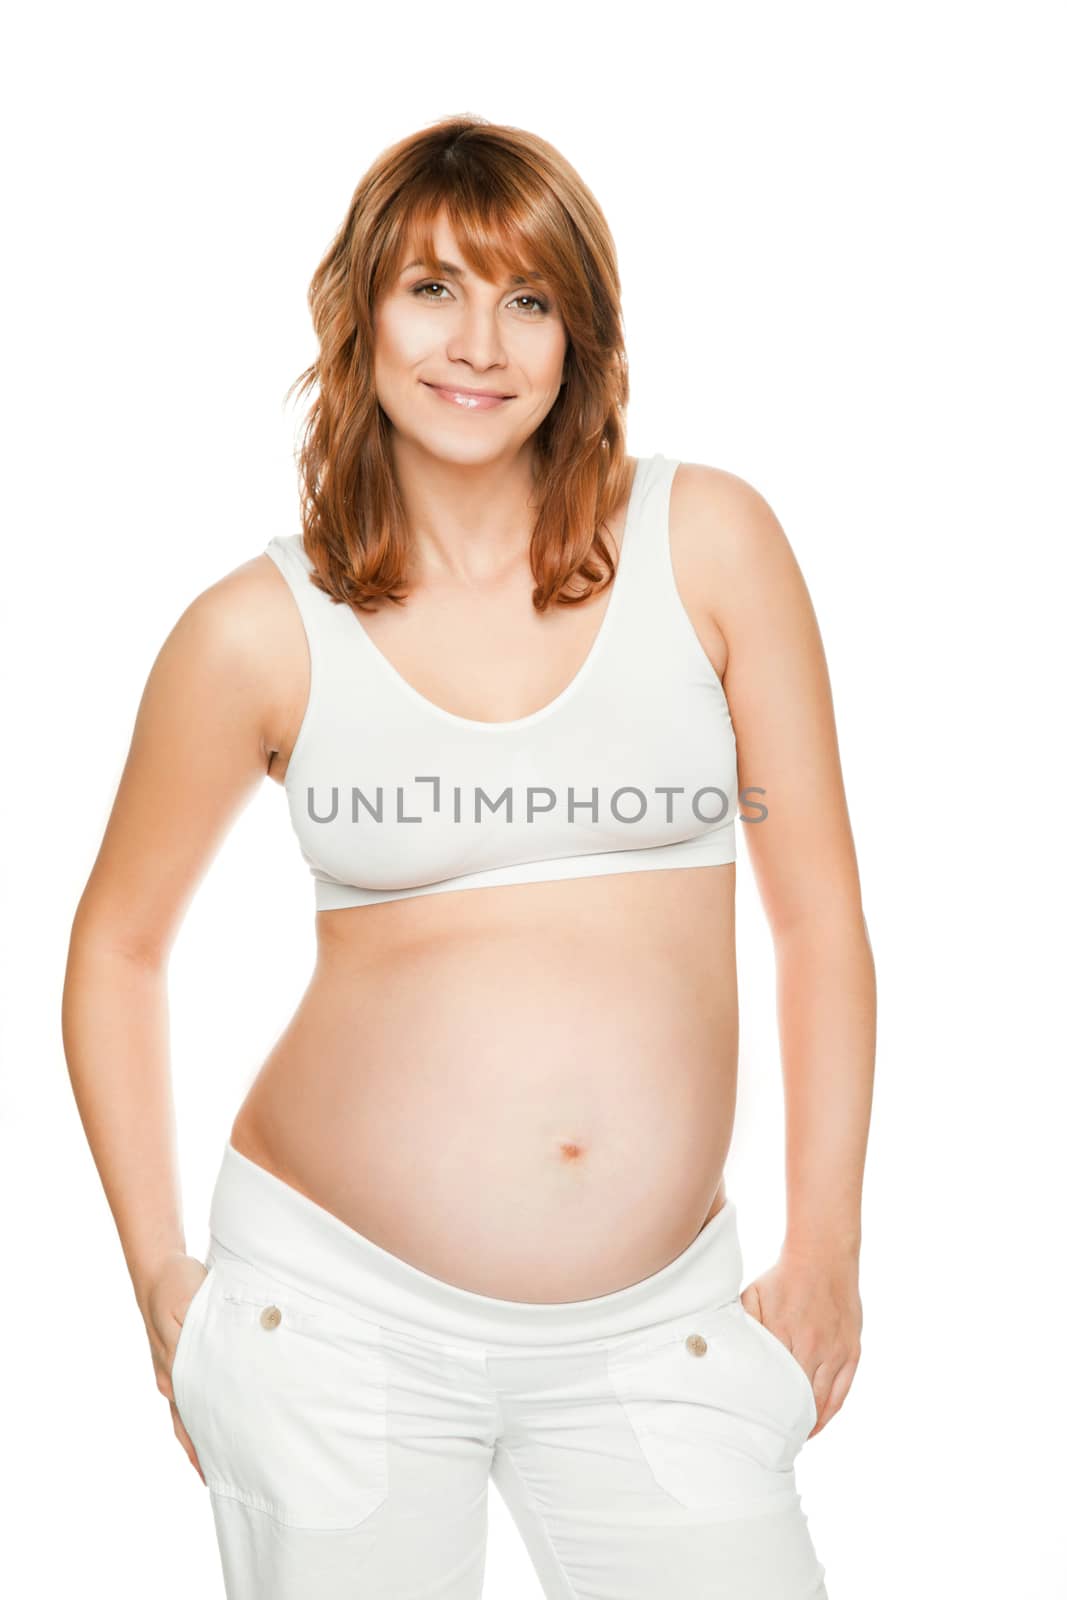 Pregnant woman smiling at camera isolated on white